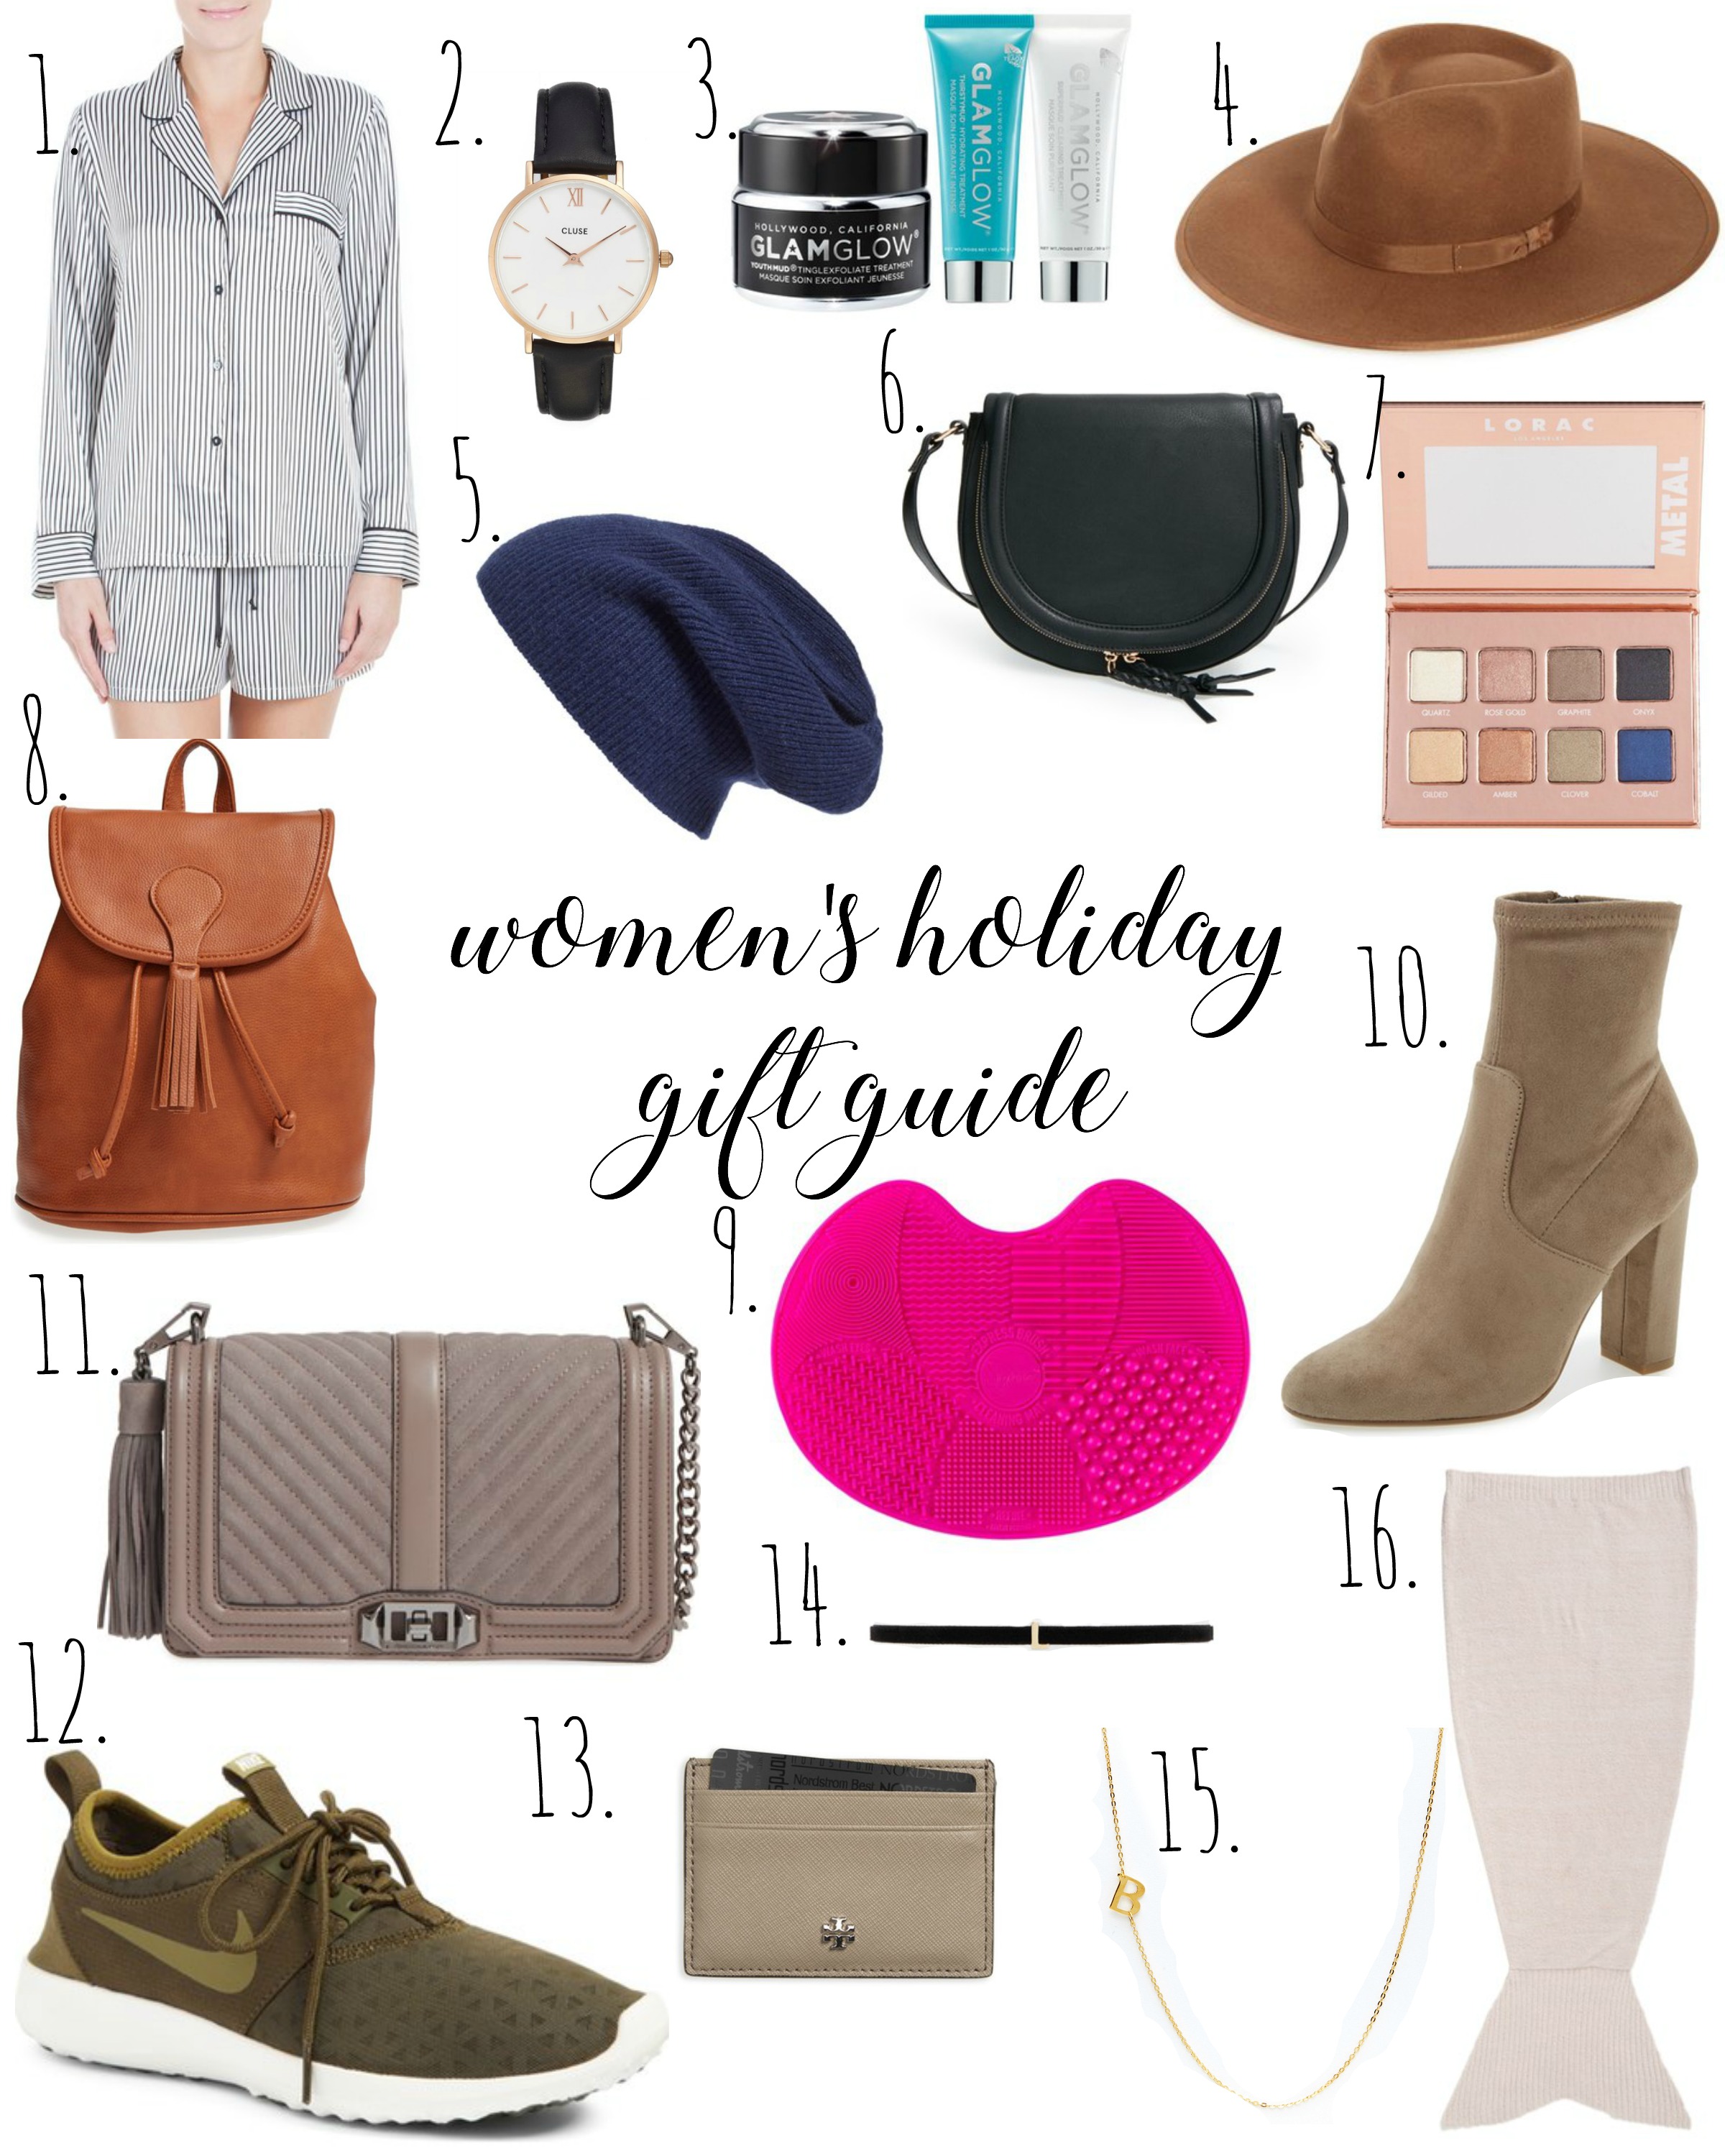 Holiday Gift Guide: Women's